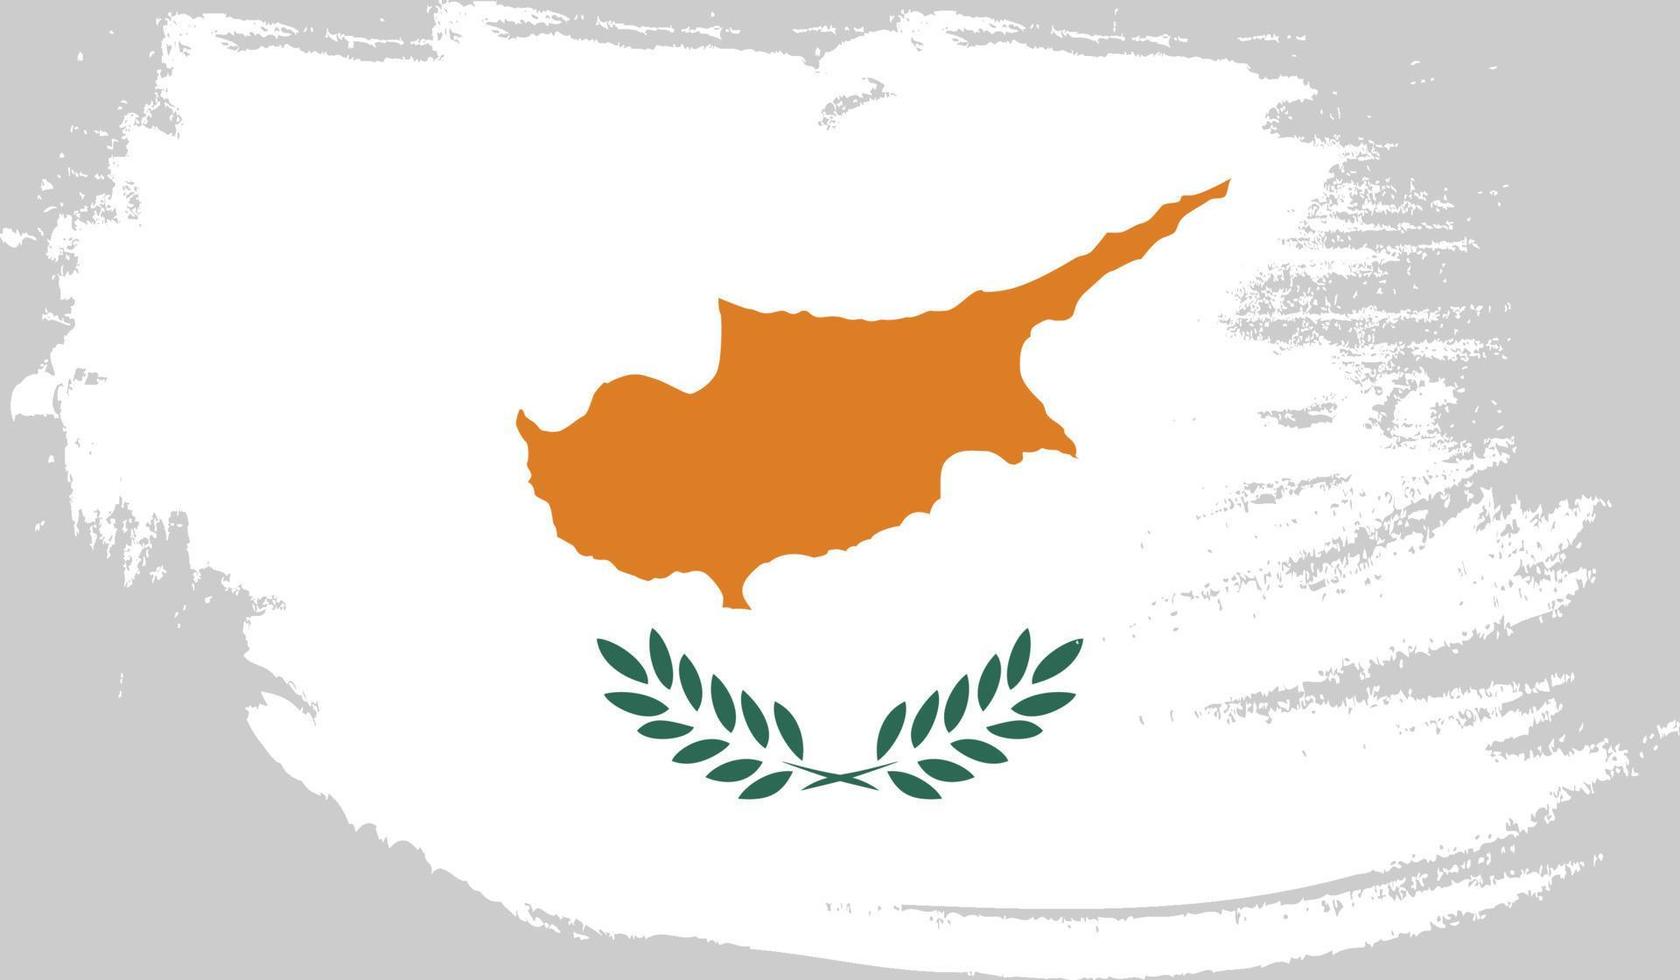 Cyprus flag with grunge texture vector